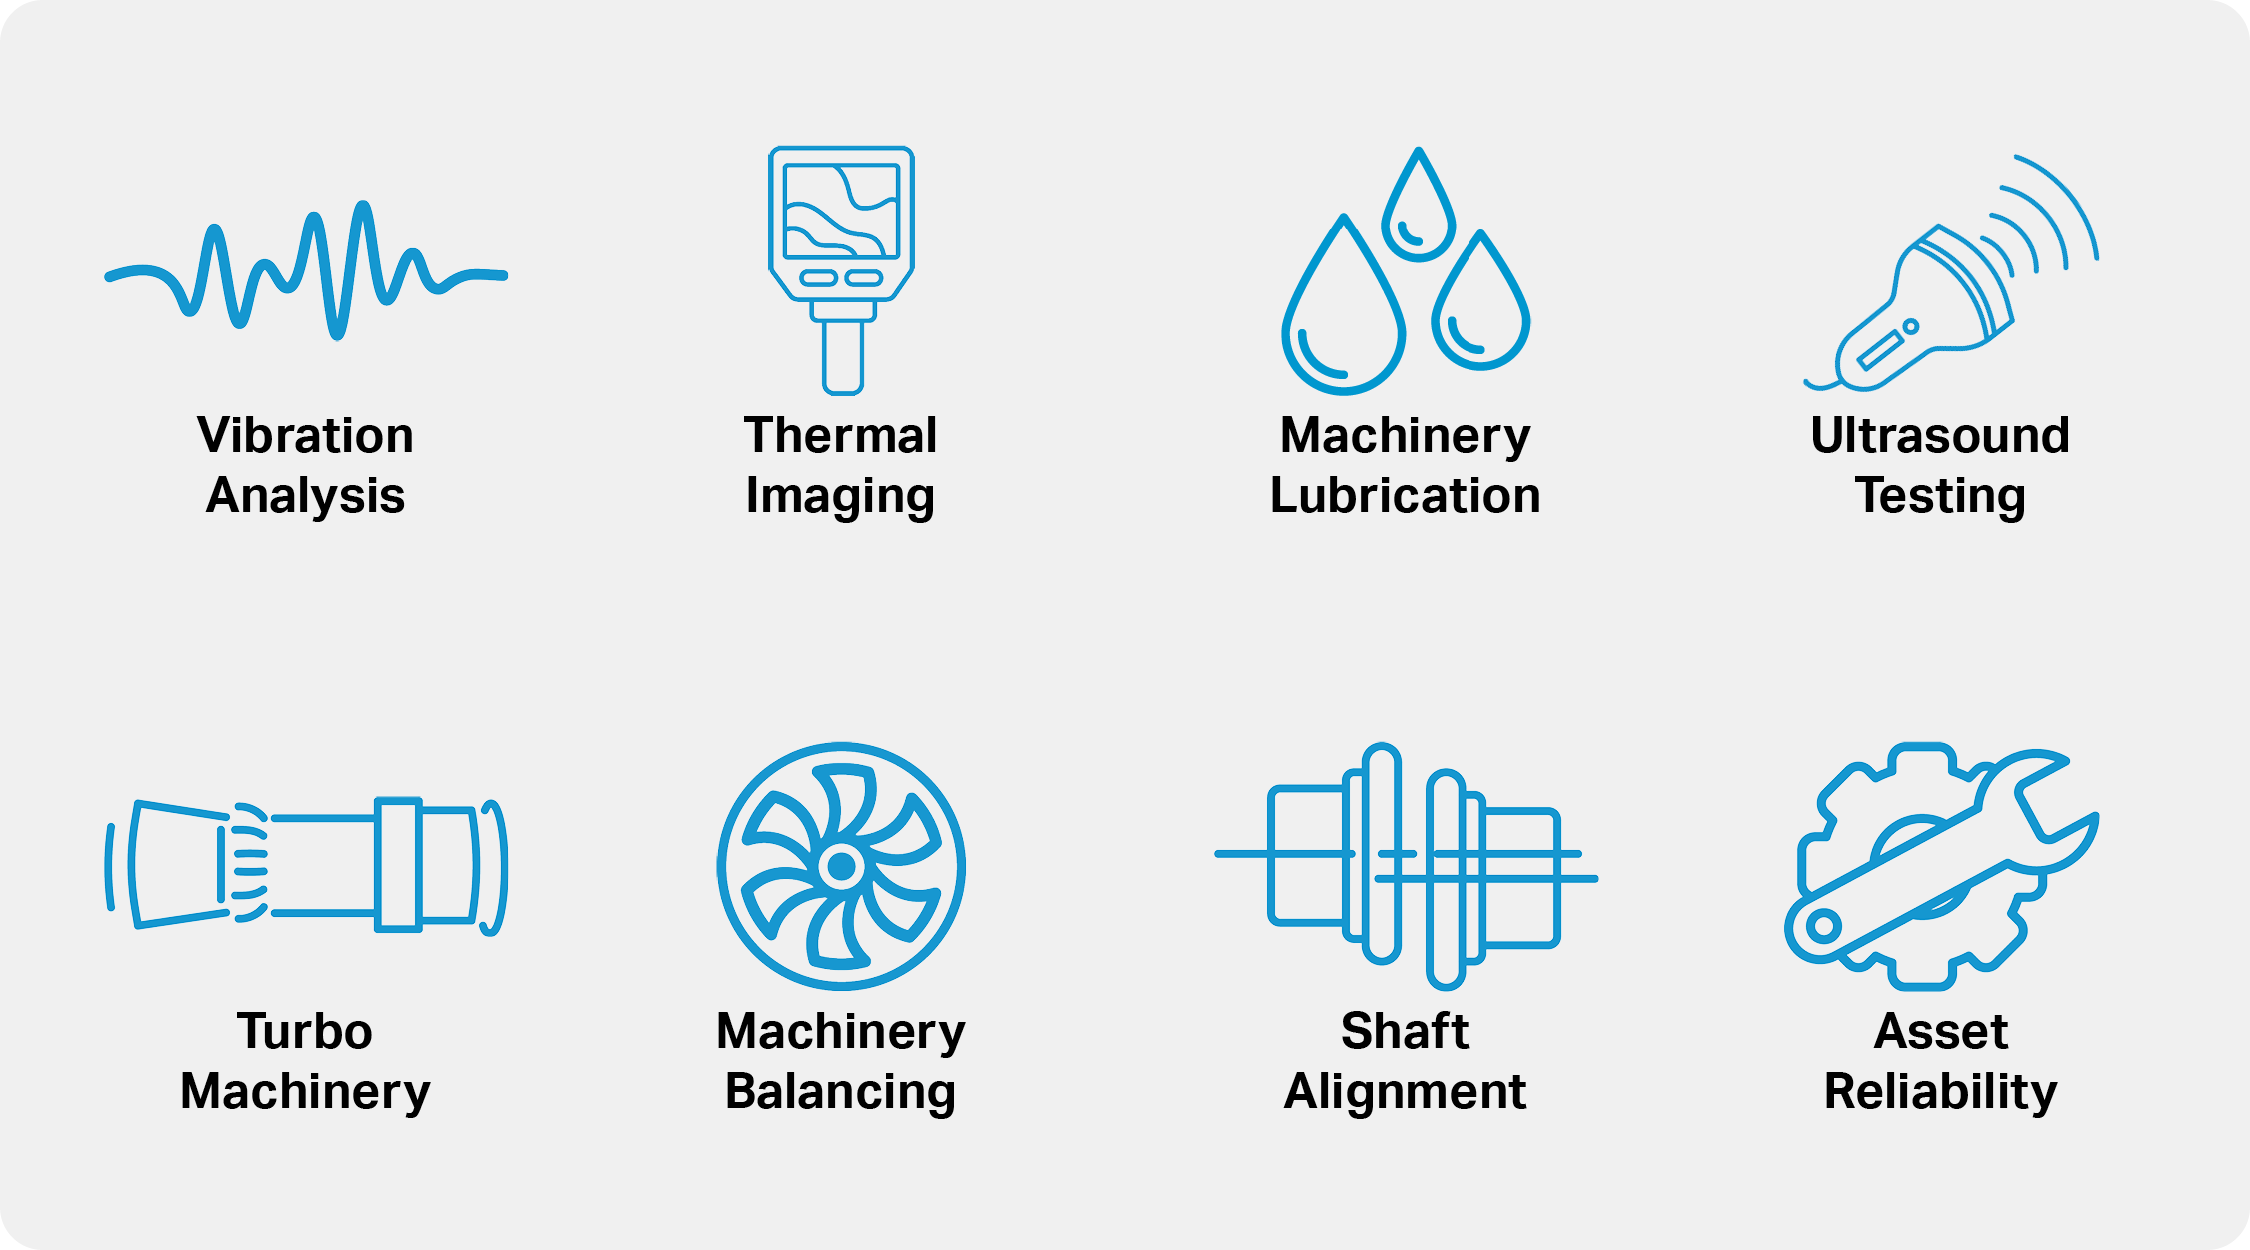 Icons depicting vibration wave, thermal imaging scanner, water droplets, ultrasound scanner, machinery, fan, shaft, and gear.